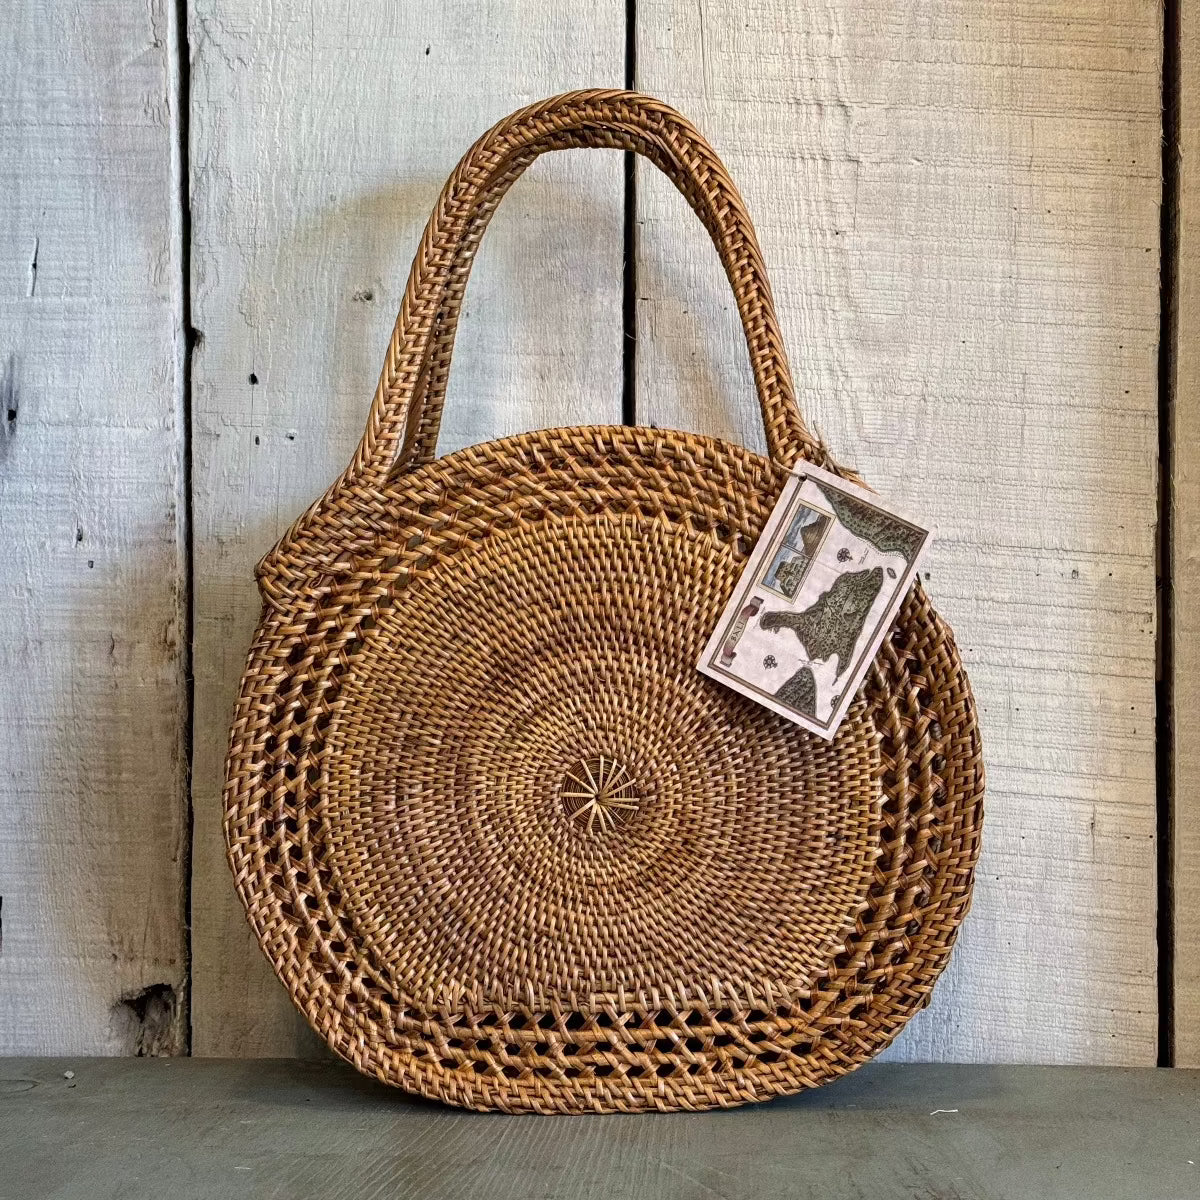 Open Weave Round Handbag from Bali Bag The Winding Road 